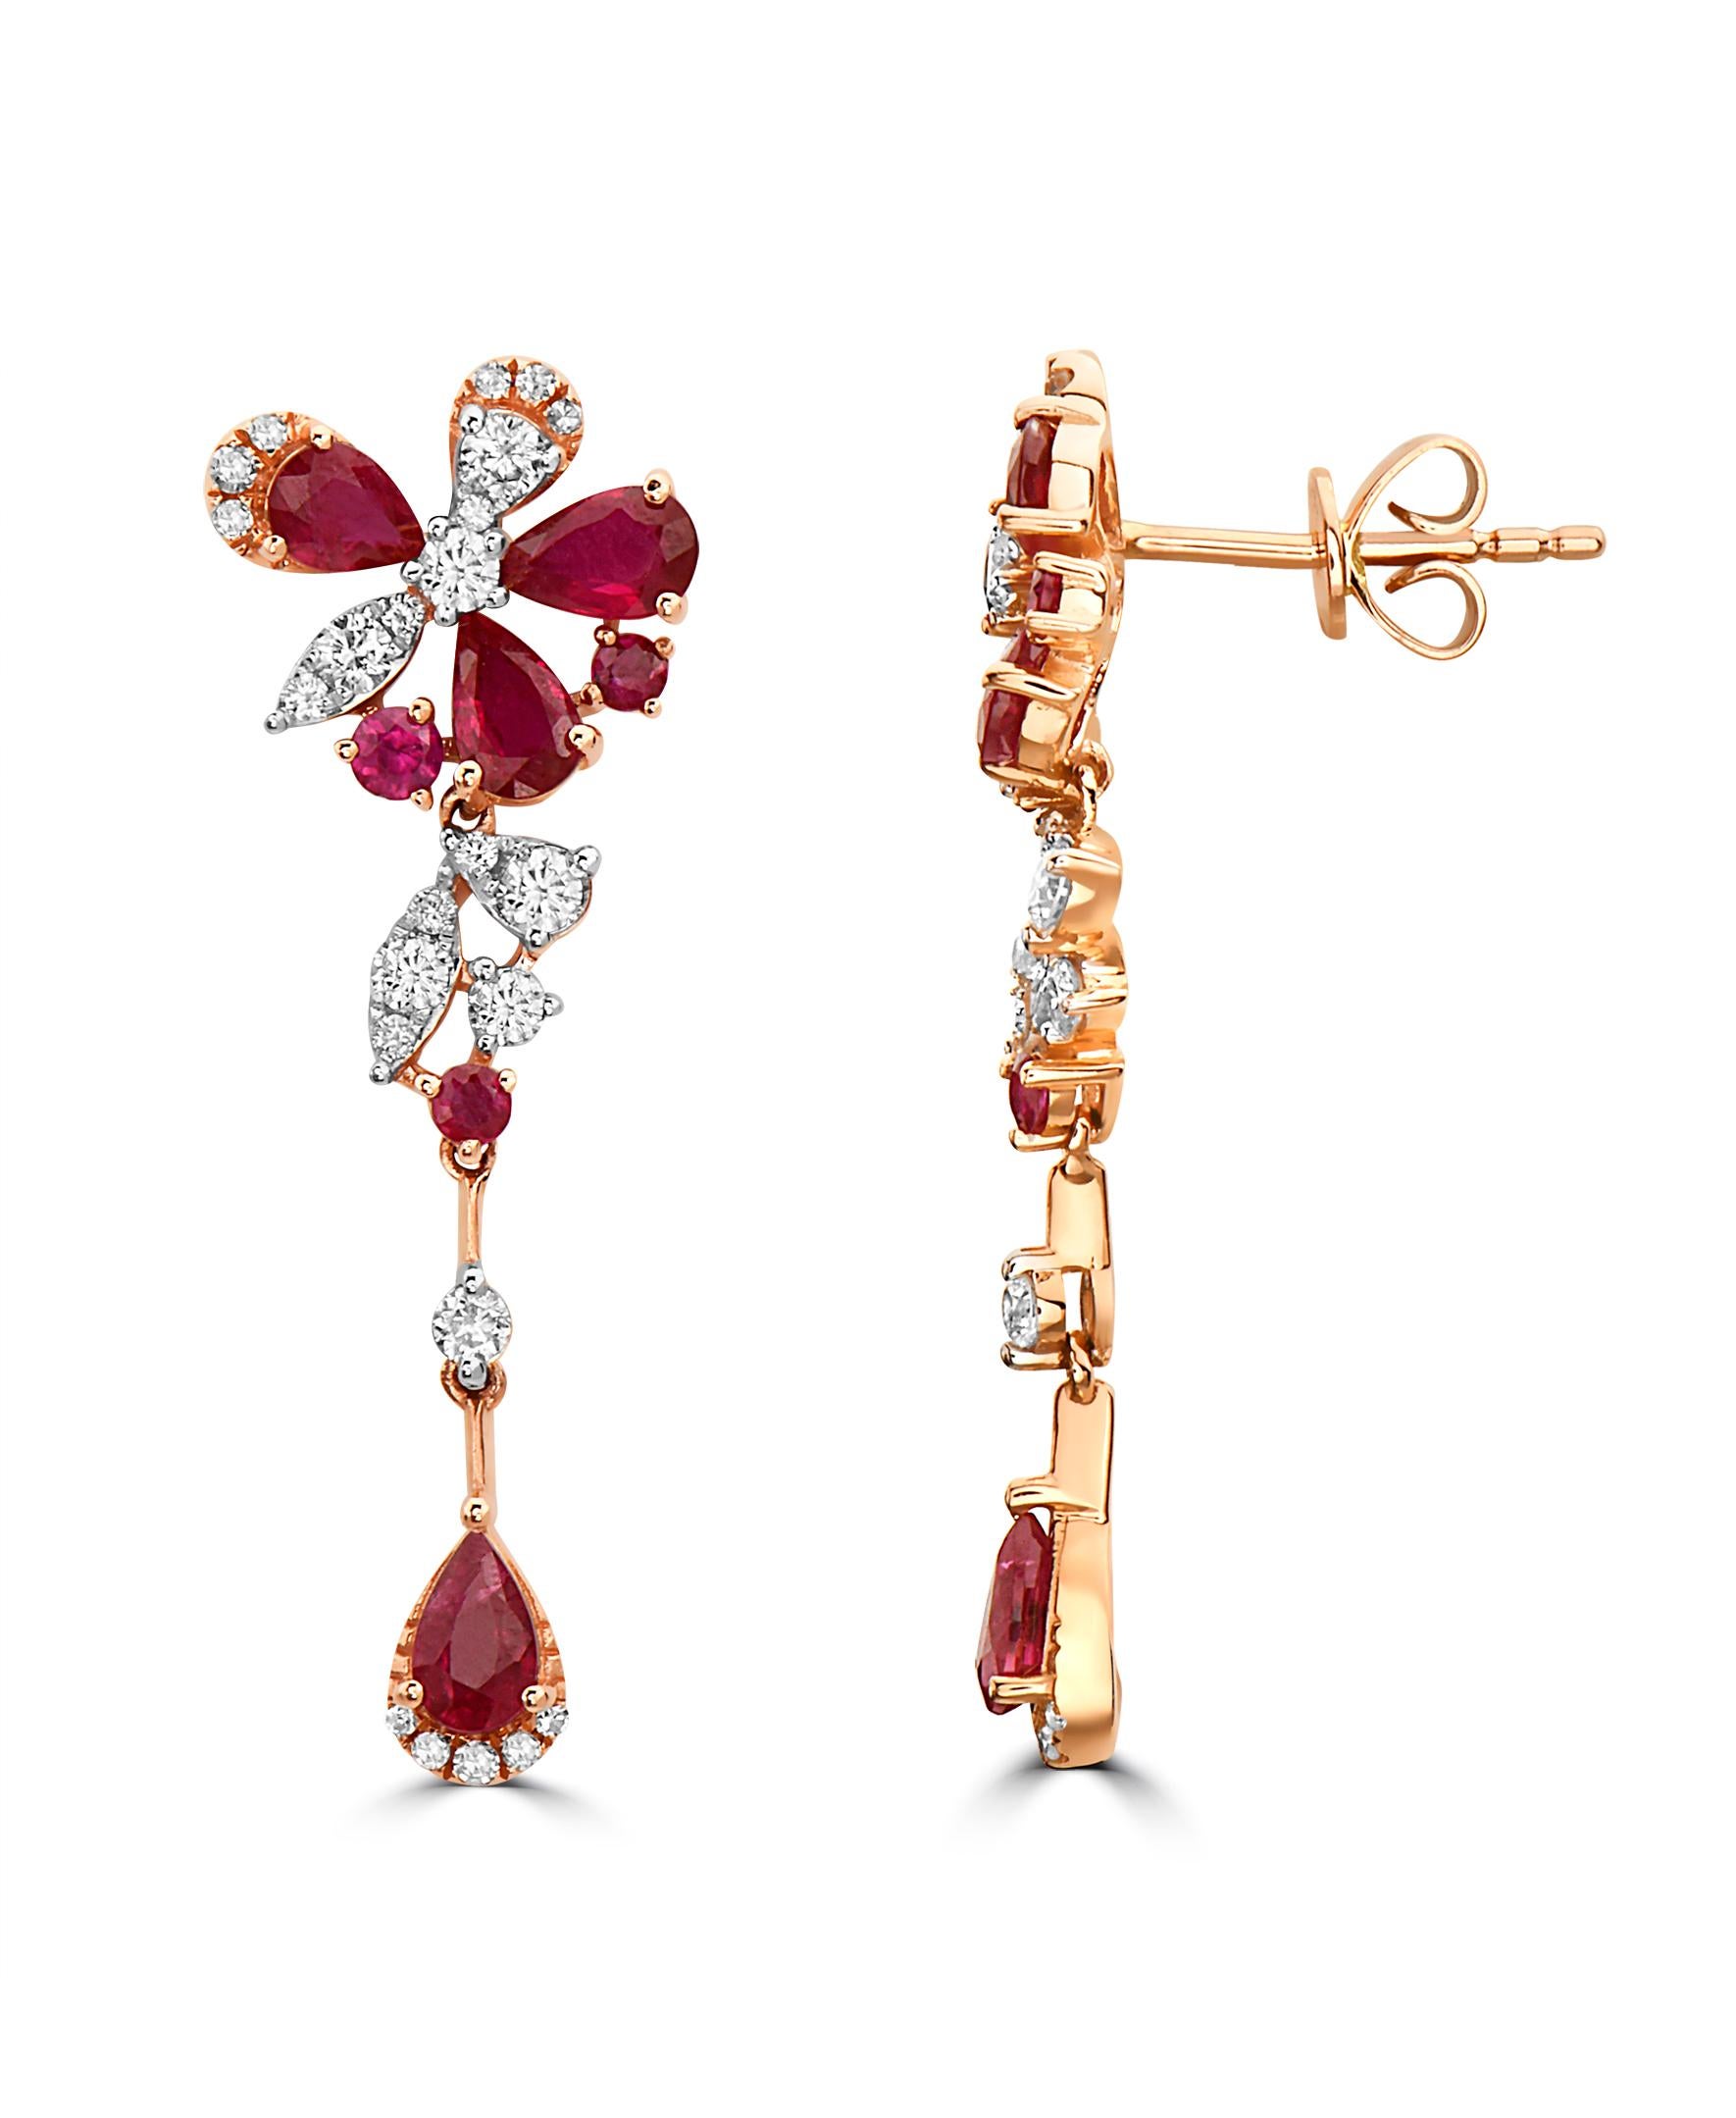 Playful dangling earrings, set in 14K rose gold, with round cut diamonds weighing 0.51ct and a combination of pear shape and round rubies, weighing a total of 2.04cts.

Item number  EE42.